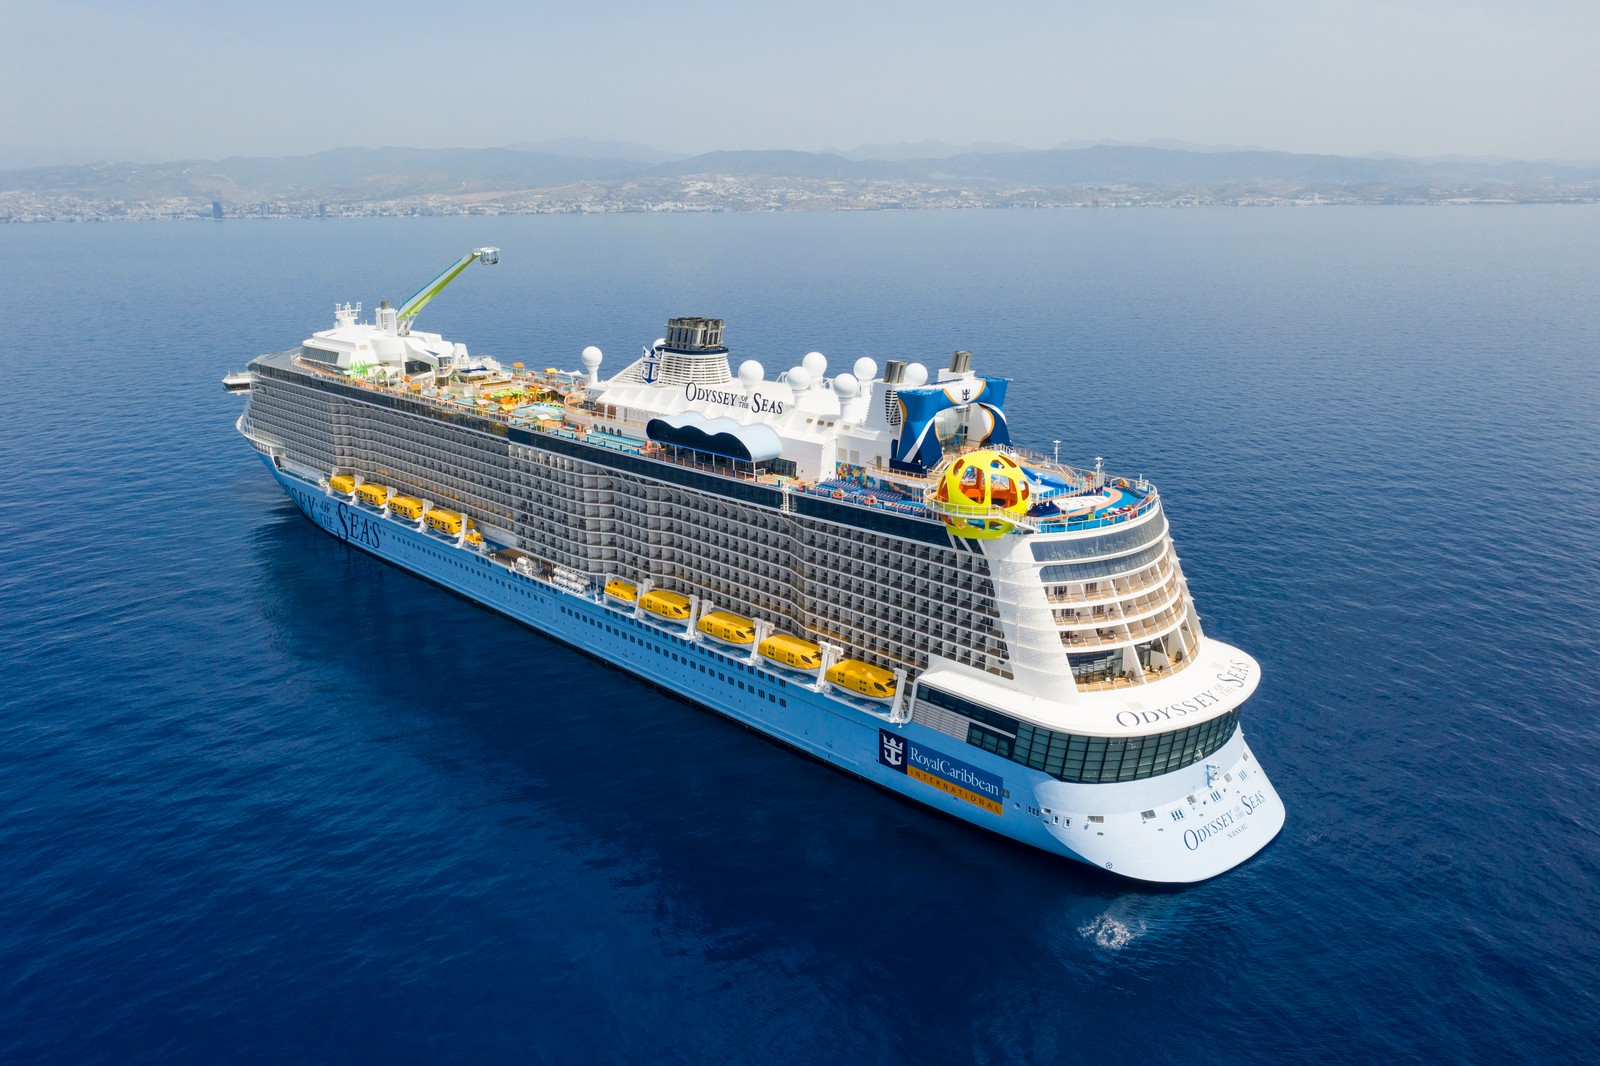 Liberty Of The Seas Entertainment Schedule 2022 2022 Royal Caribbean Cruise Planning Guide | Royal Caribbean Blog